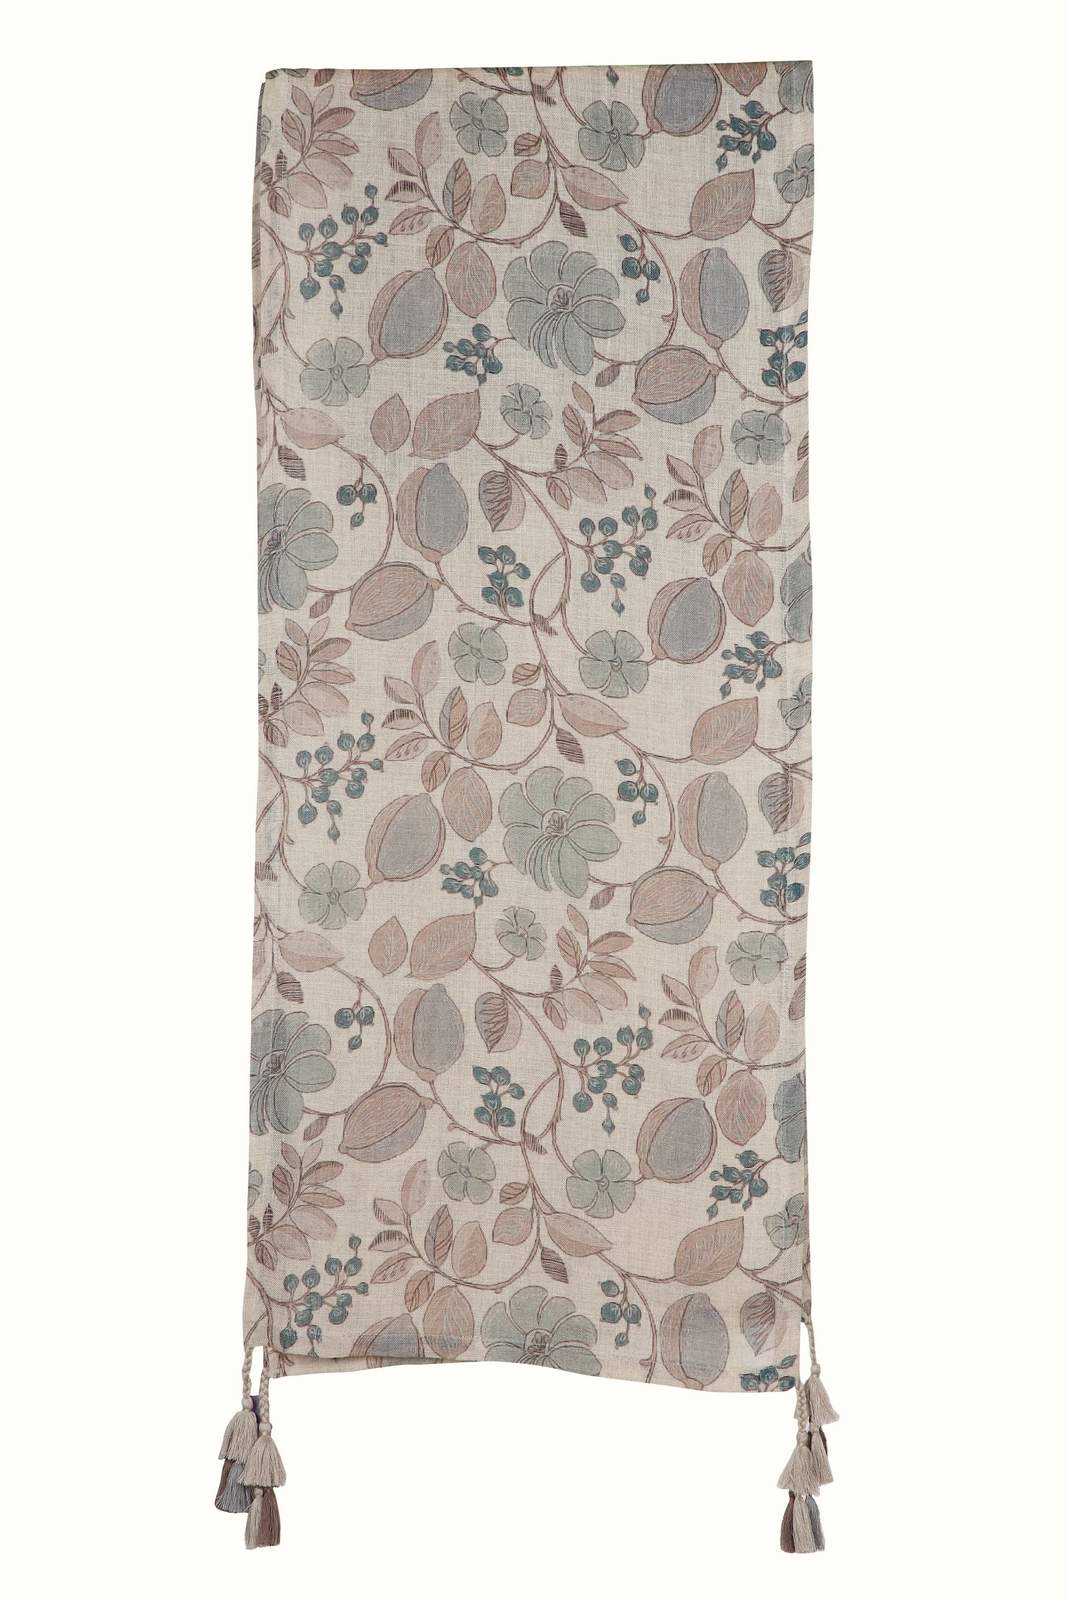 Linen and Linens - Teal and Brown Printed Linen Stole - 3